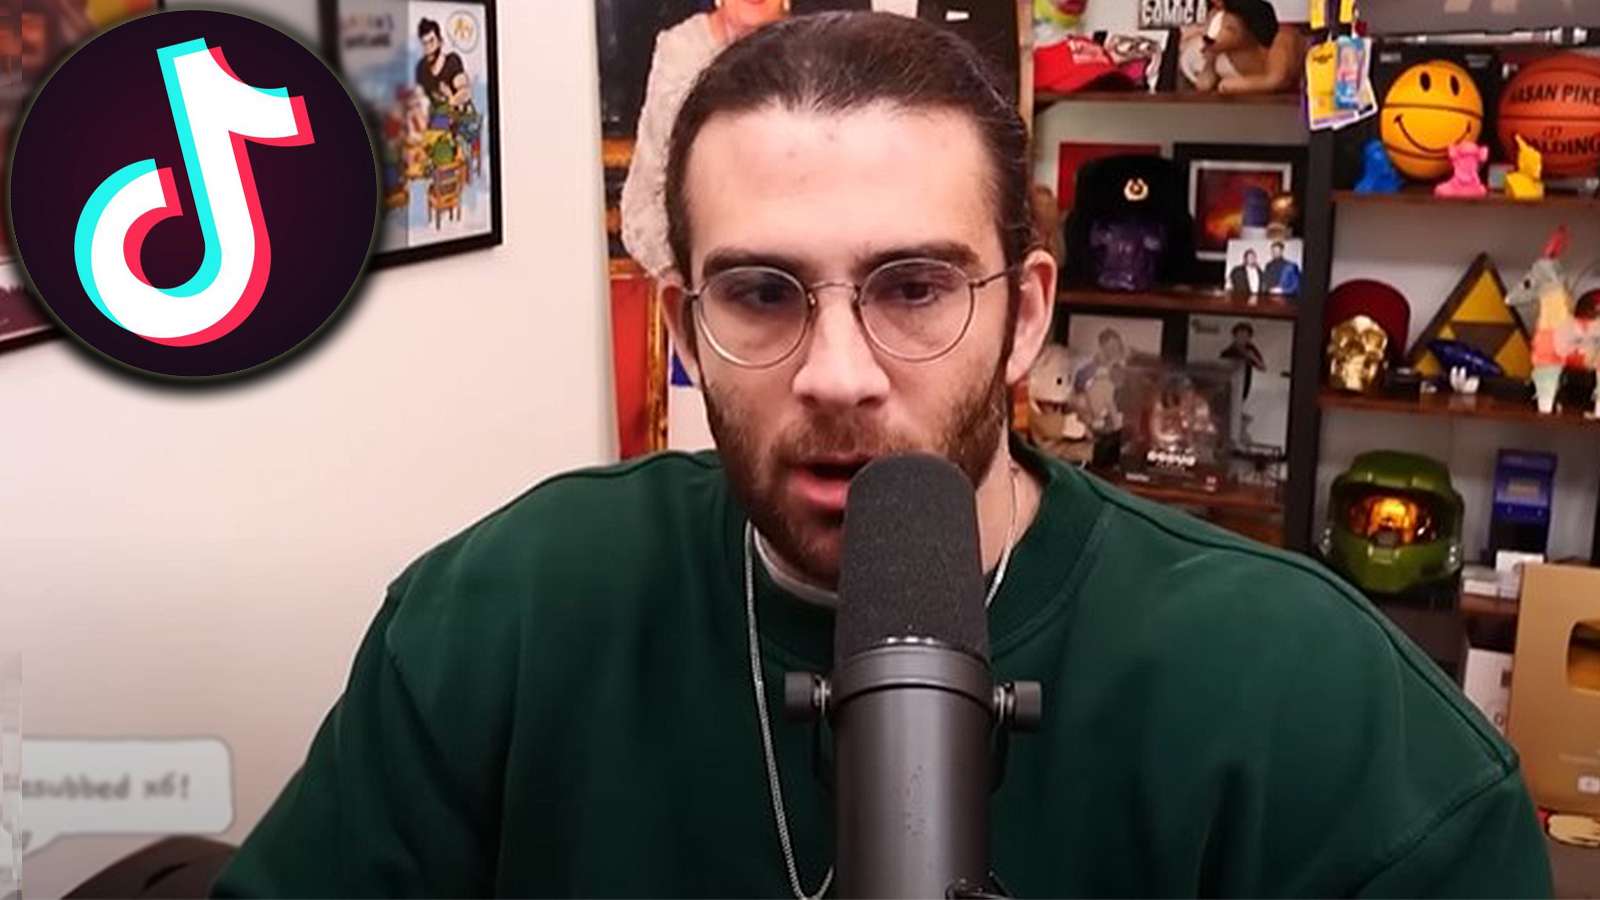 Hasan calls out TikTok for repeated bans mass reporting